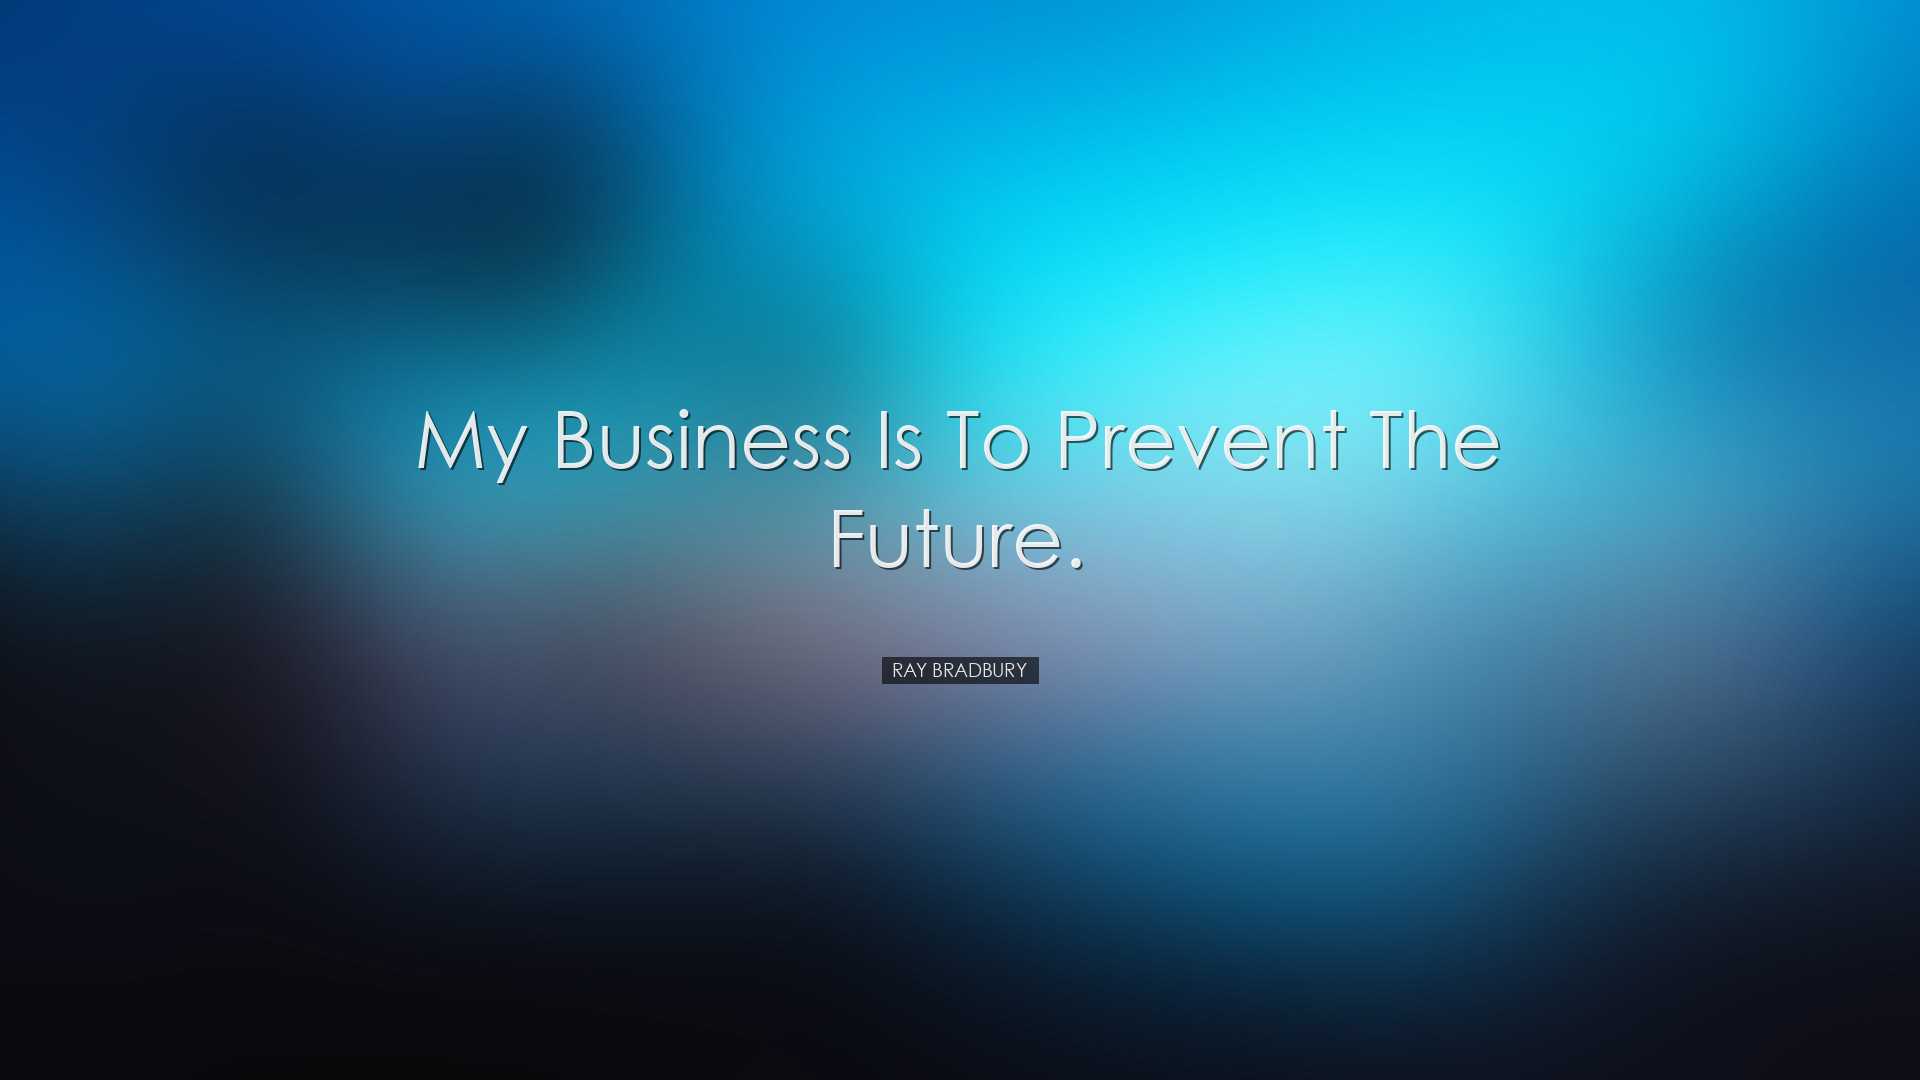 My business is to prevent the future. - Ray Bradbury